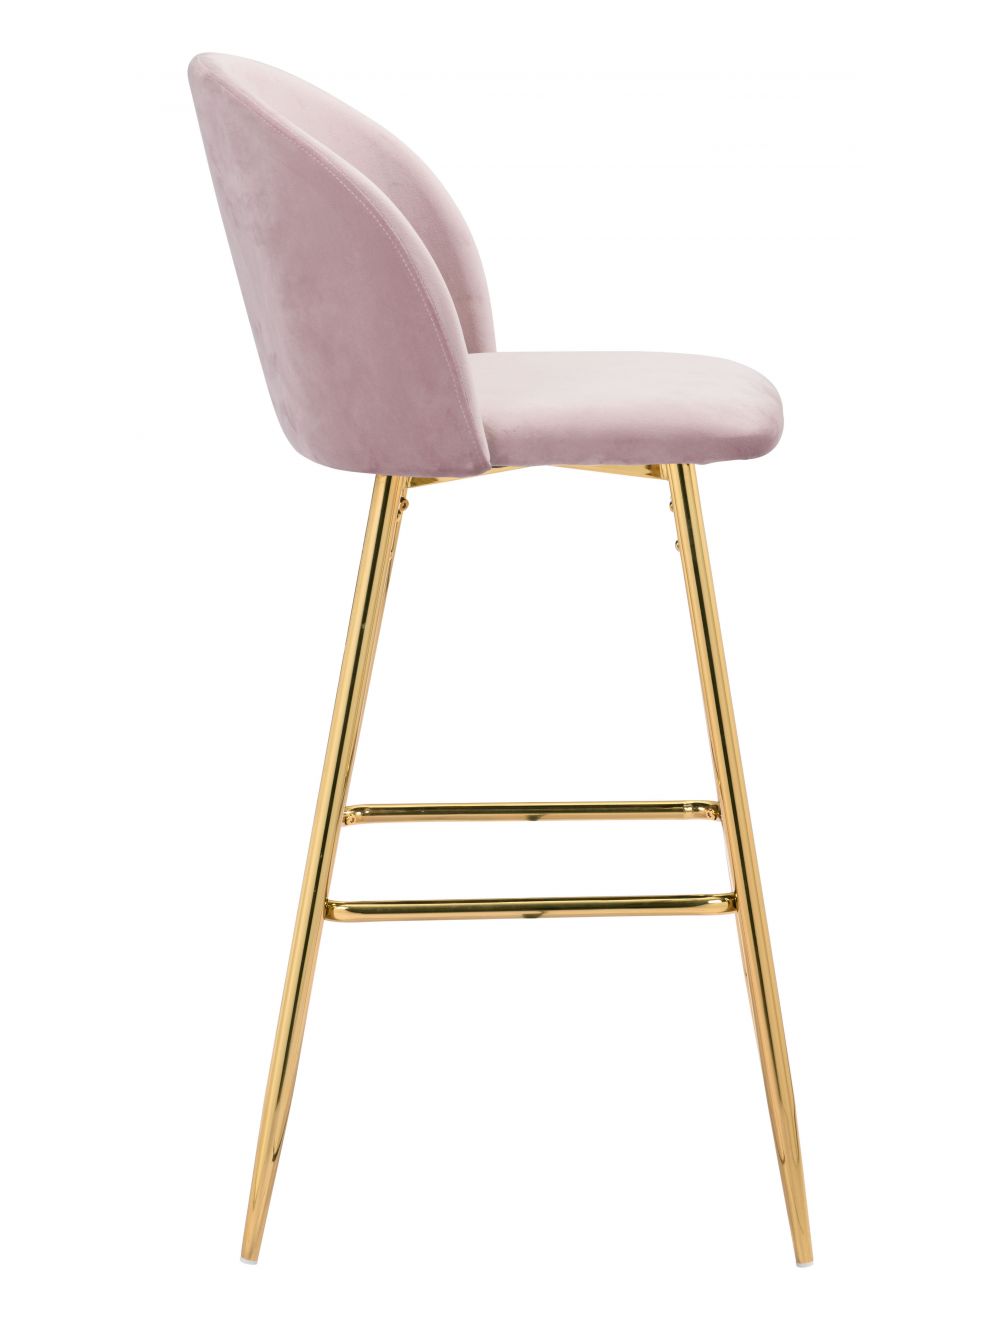 Cozy Bar Chair Pink & Gold